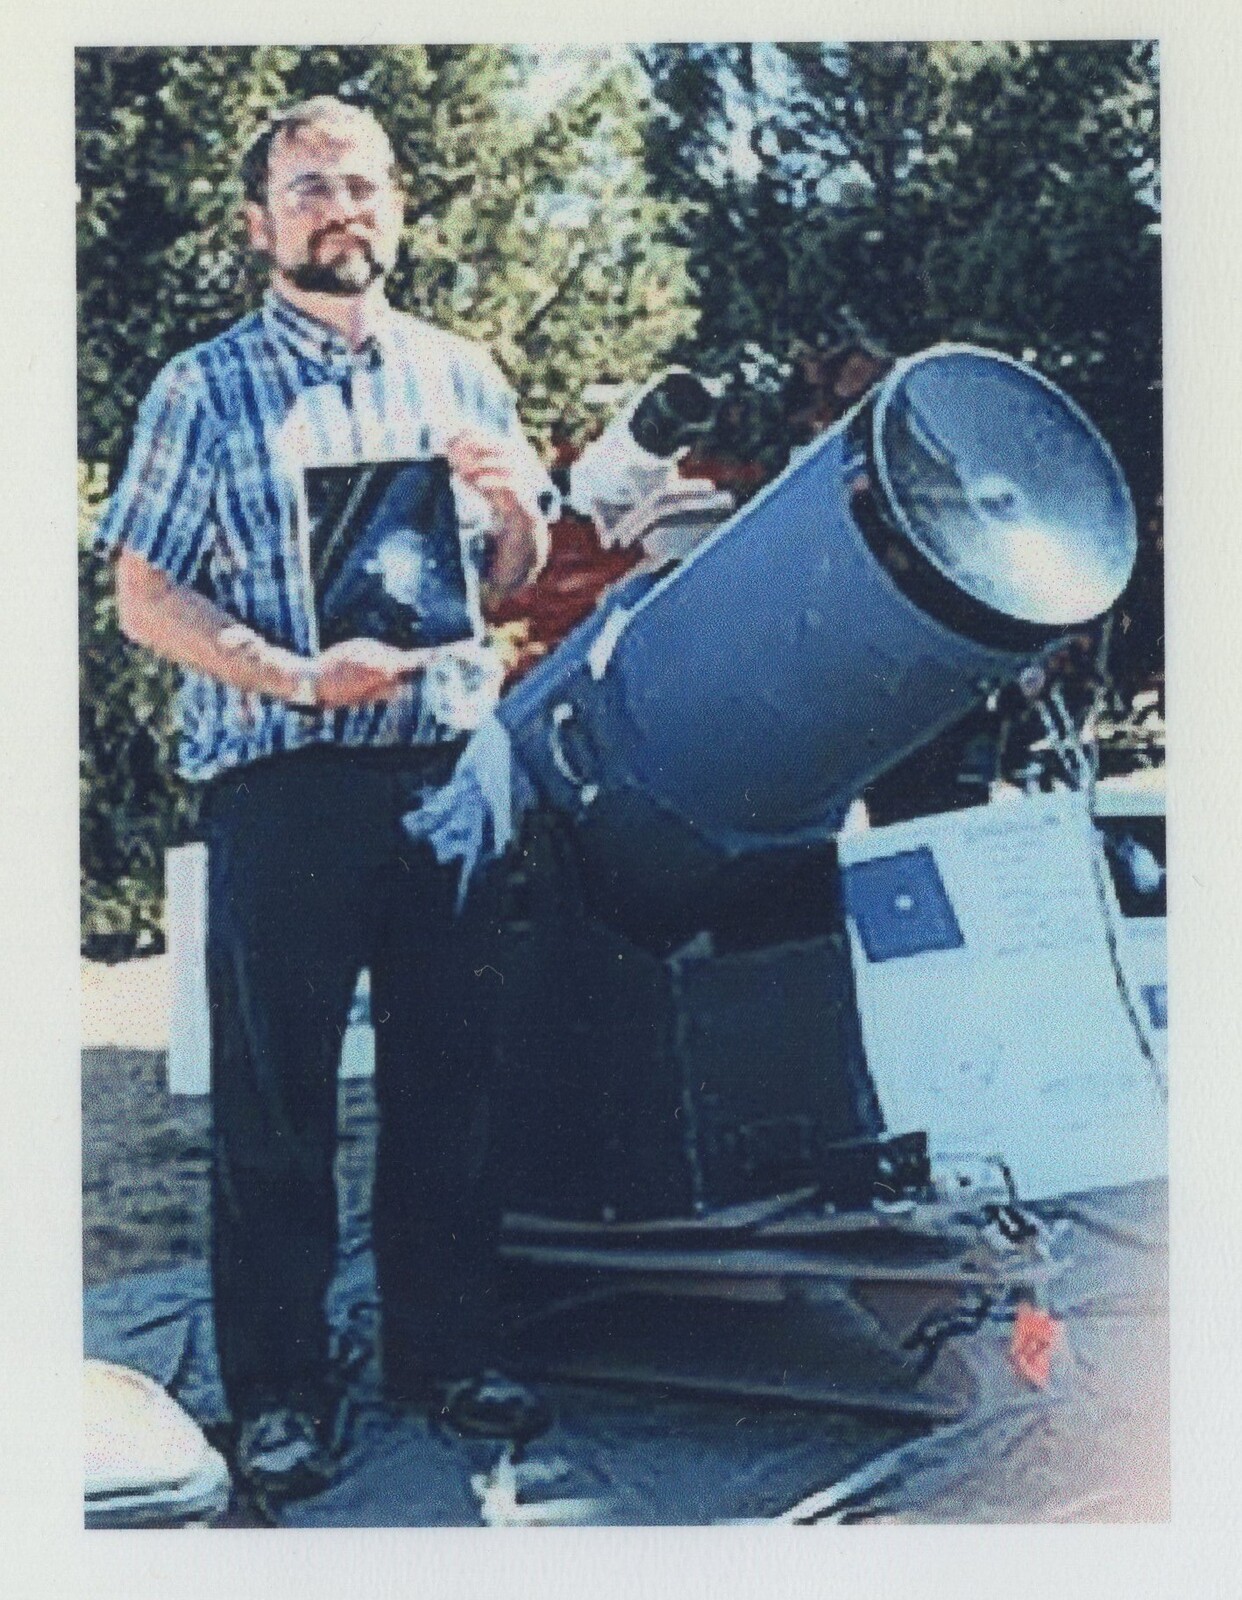 Riverside Telescope Makers Conference 1980s